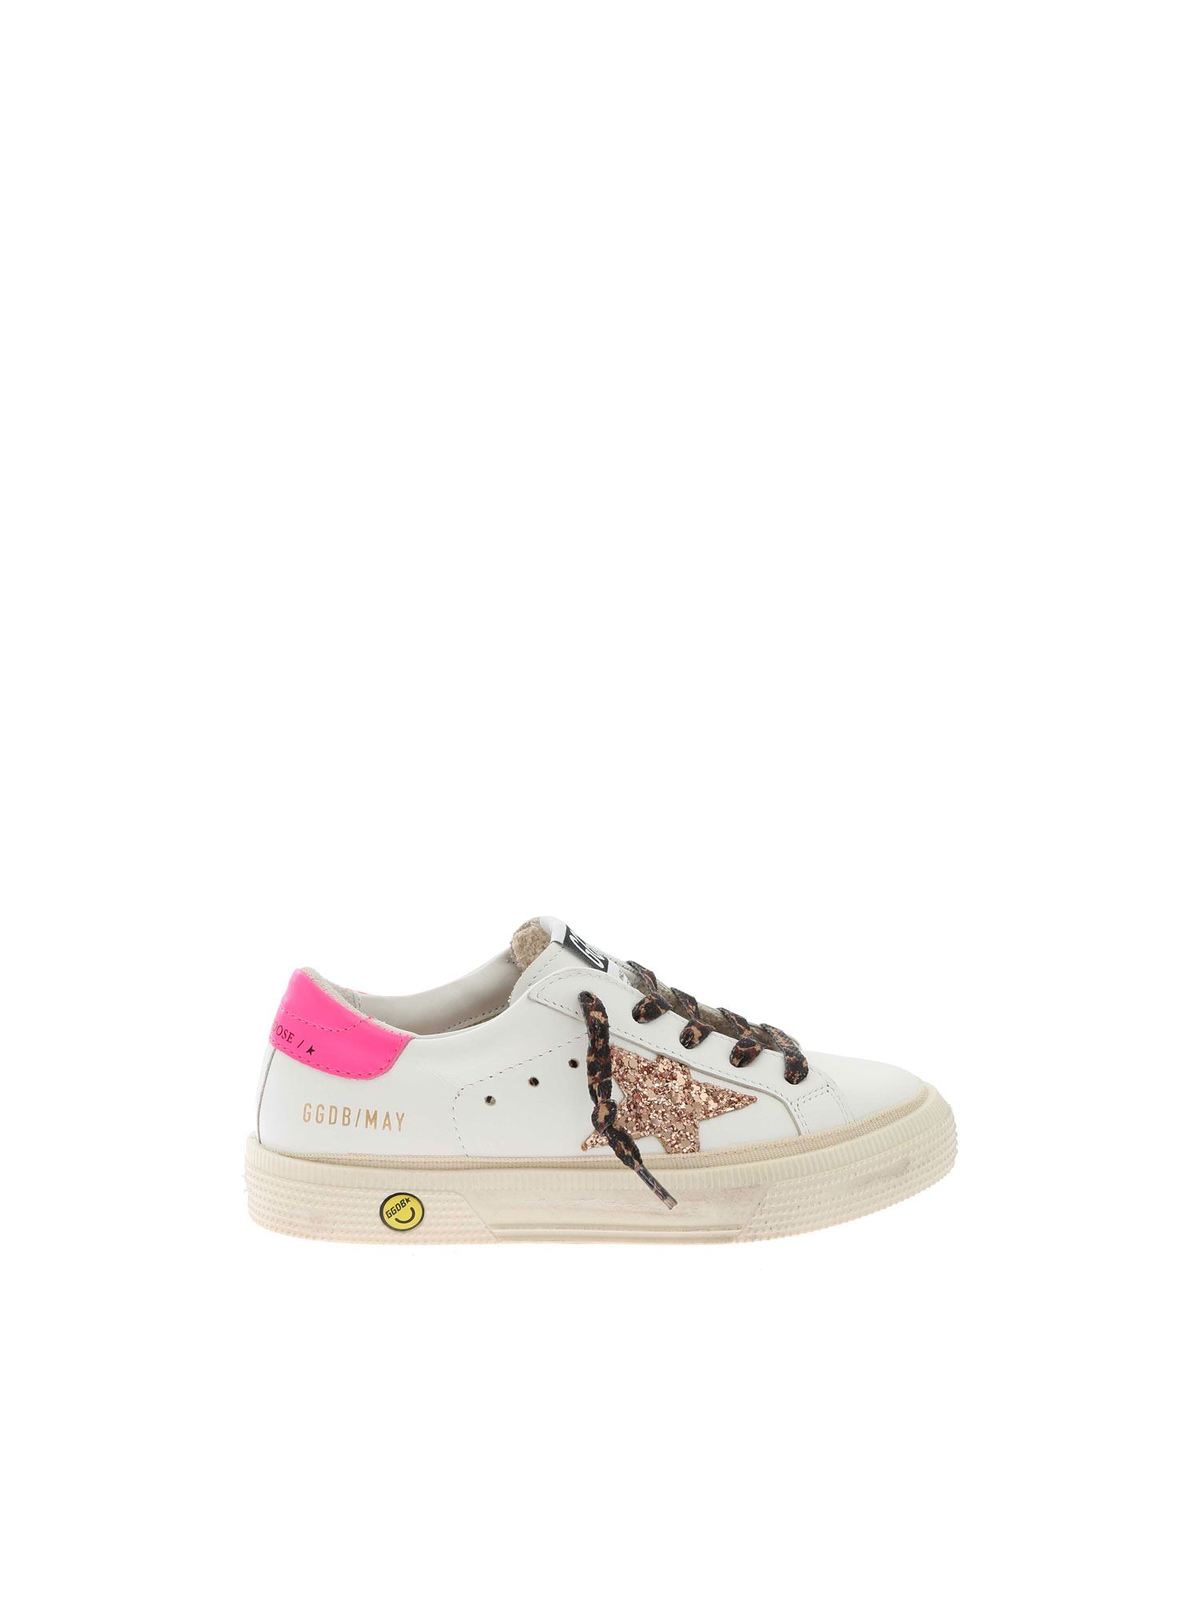 Golden Goose Kids' May Trainers In White And Neon Pink